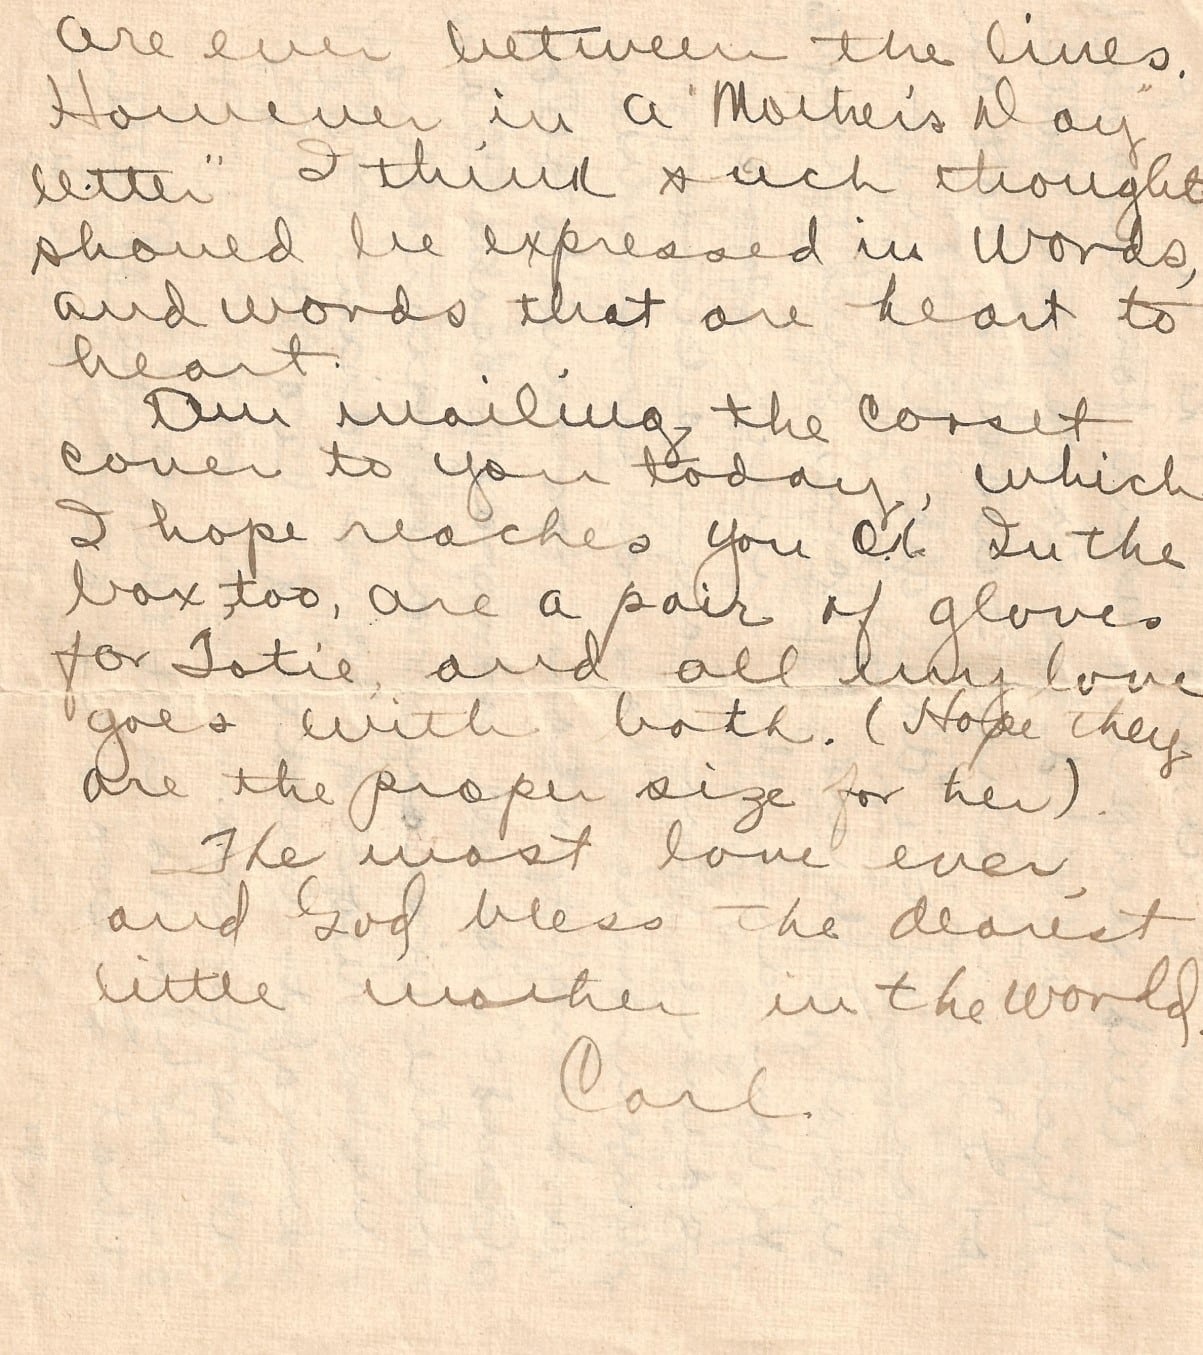 Mother's Day letter from WWI, page 4